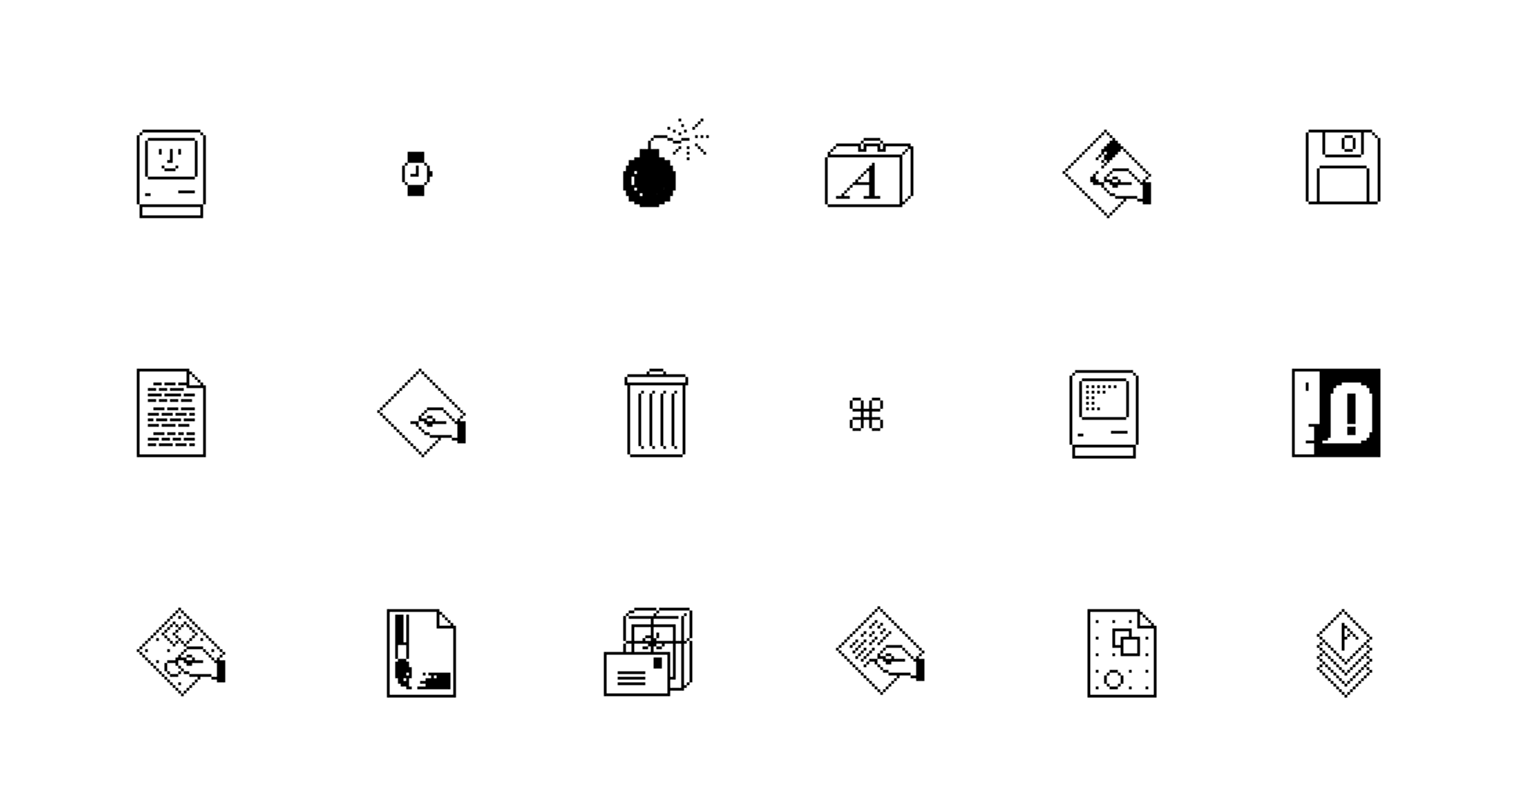 Susan Kare icons for the first Mac